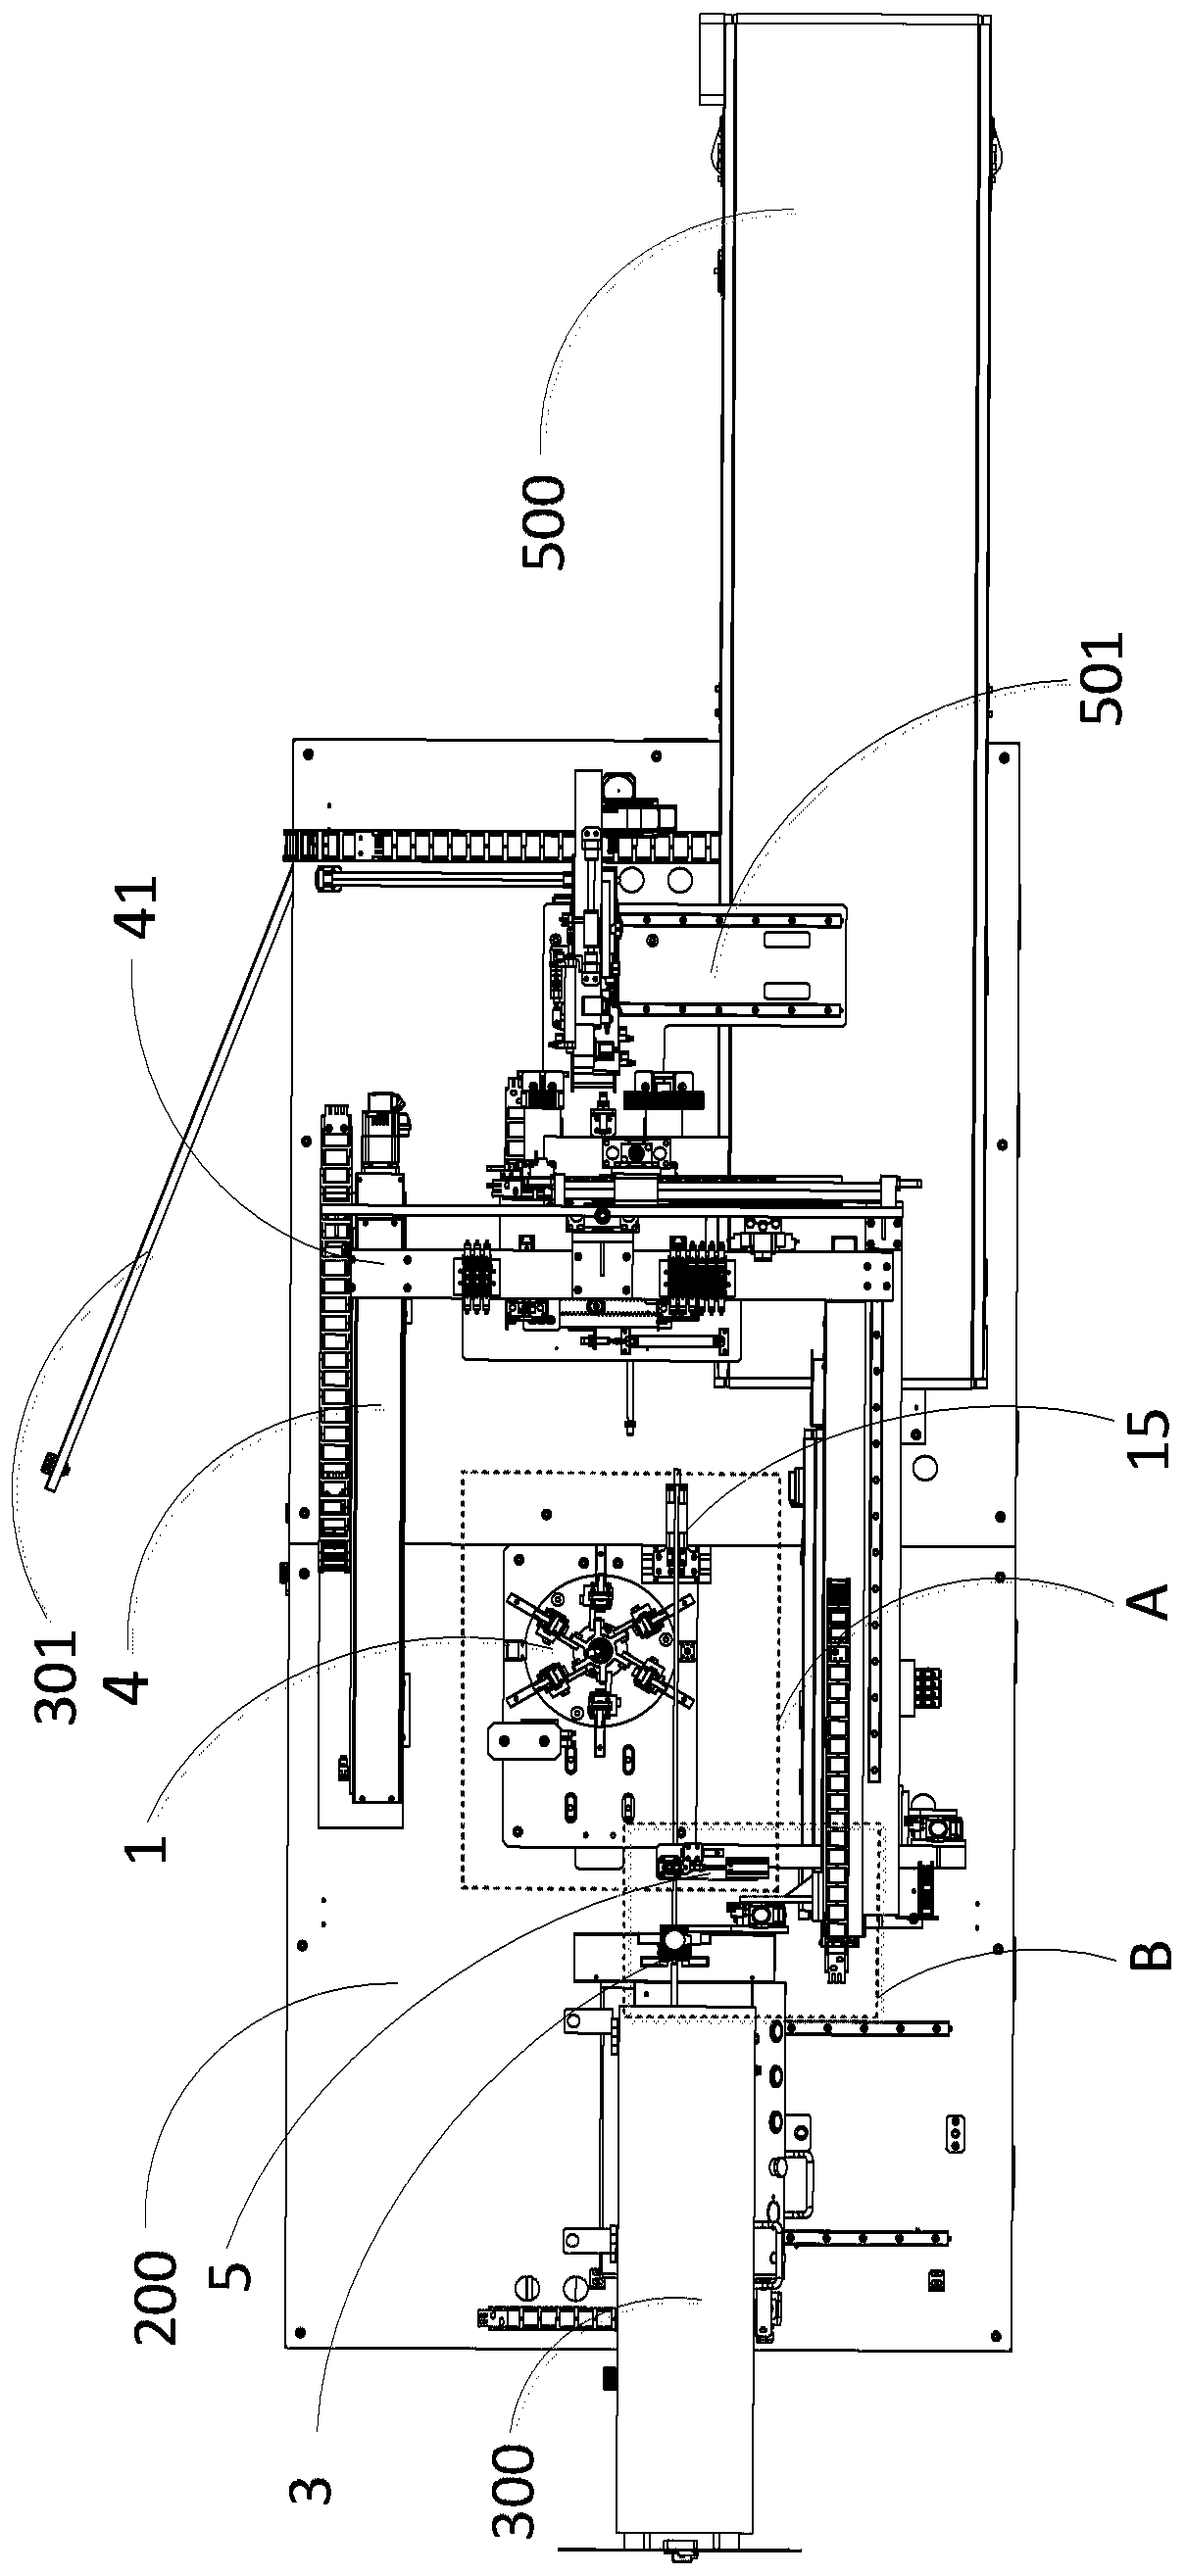 Cable winding device and cable bundling system